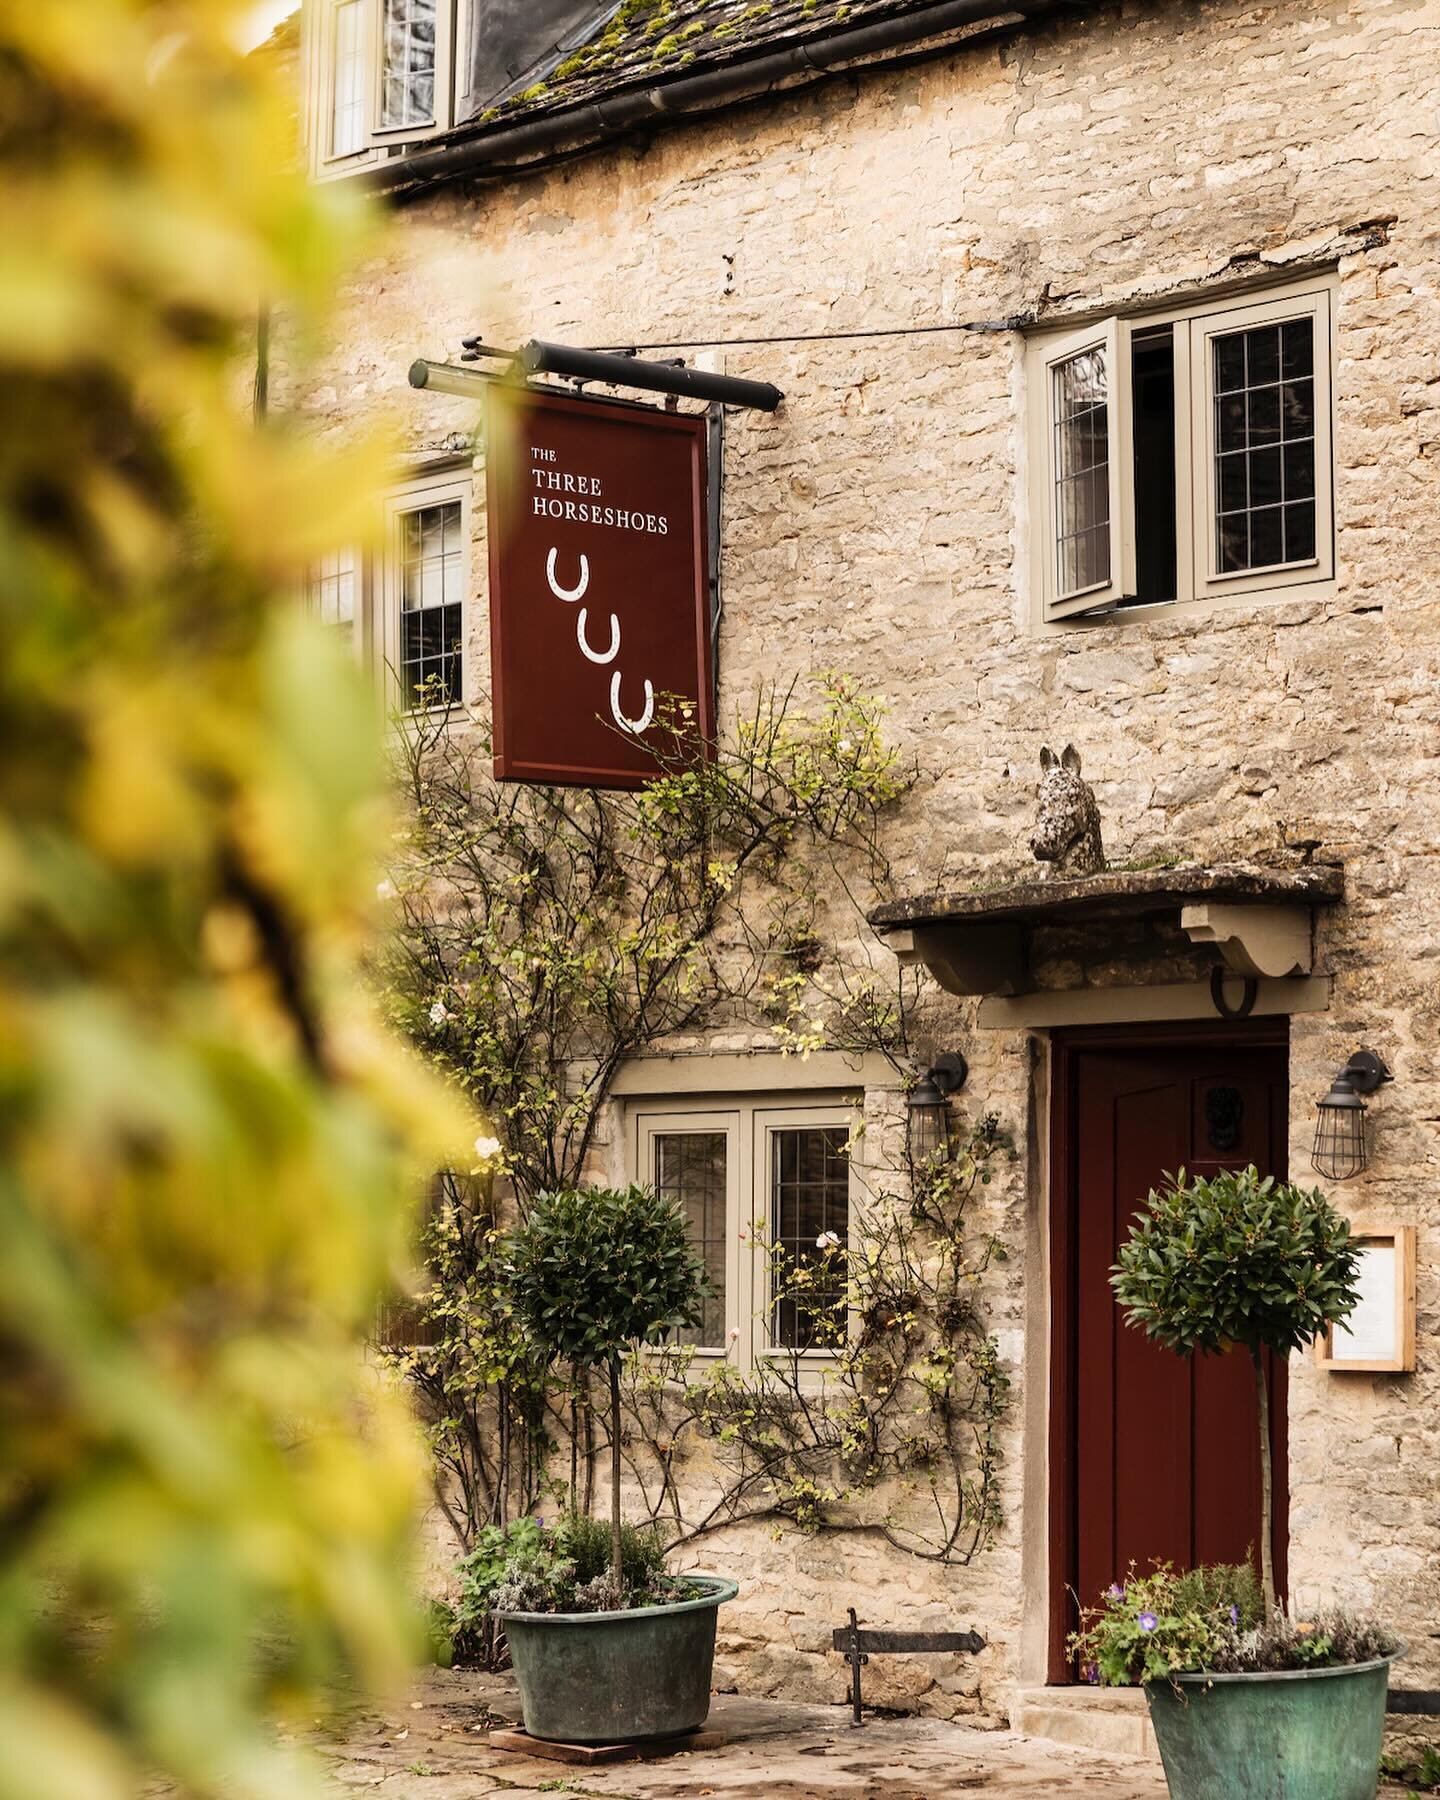 The Three Horseshoes is an 18th century pub set in the quintessential Cotswold village of Asthall, The Three Horseshoes has always been a local&rsquo;s pub, renowned for its warm welcome and generous community spirit. 

We were recently invited down 